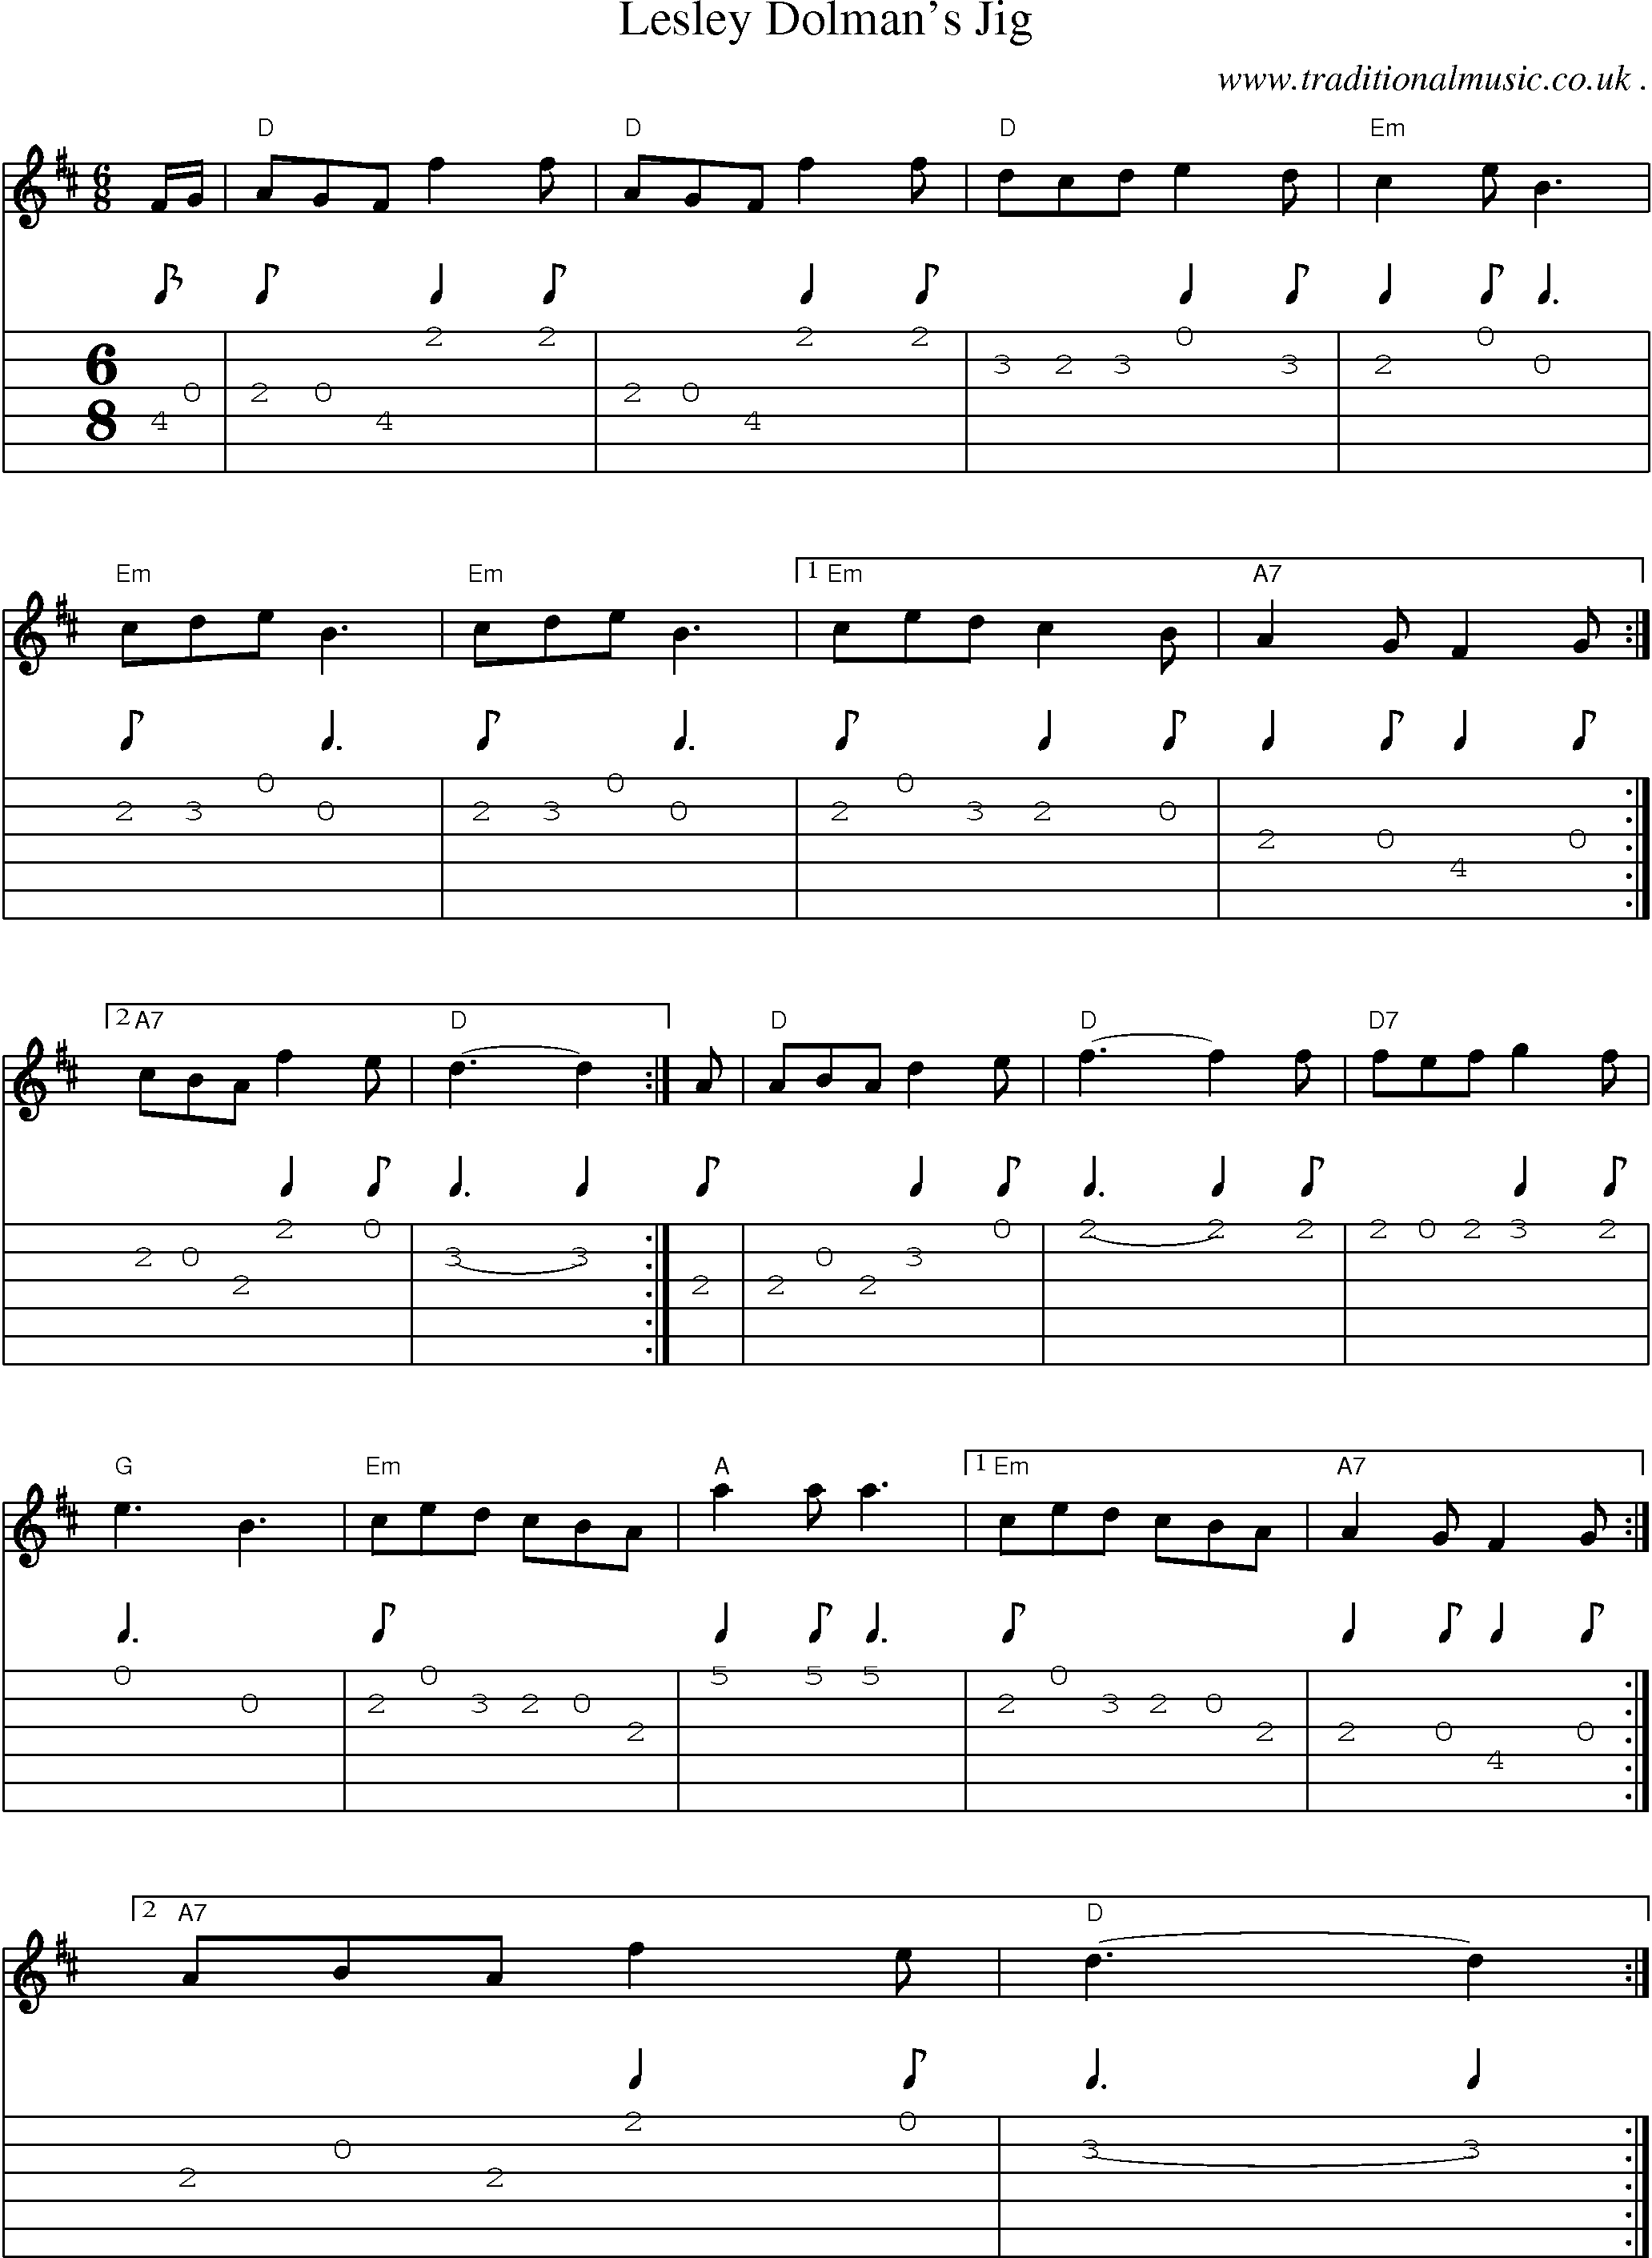 Sheet-Music and Guitar Tabs for Lesley Dolmans Jig